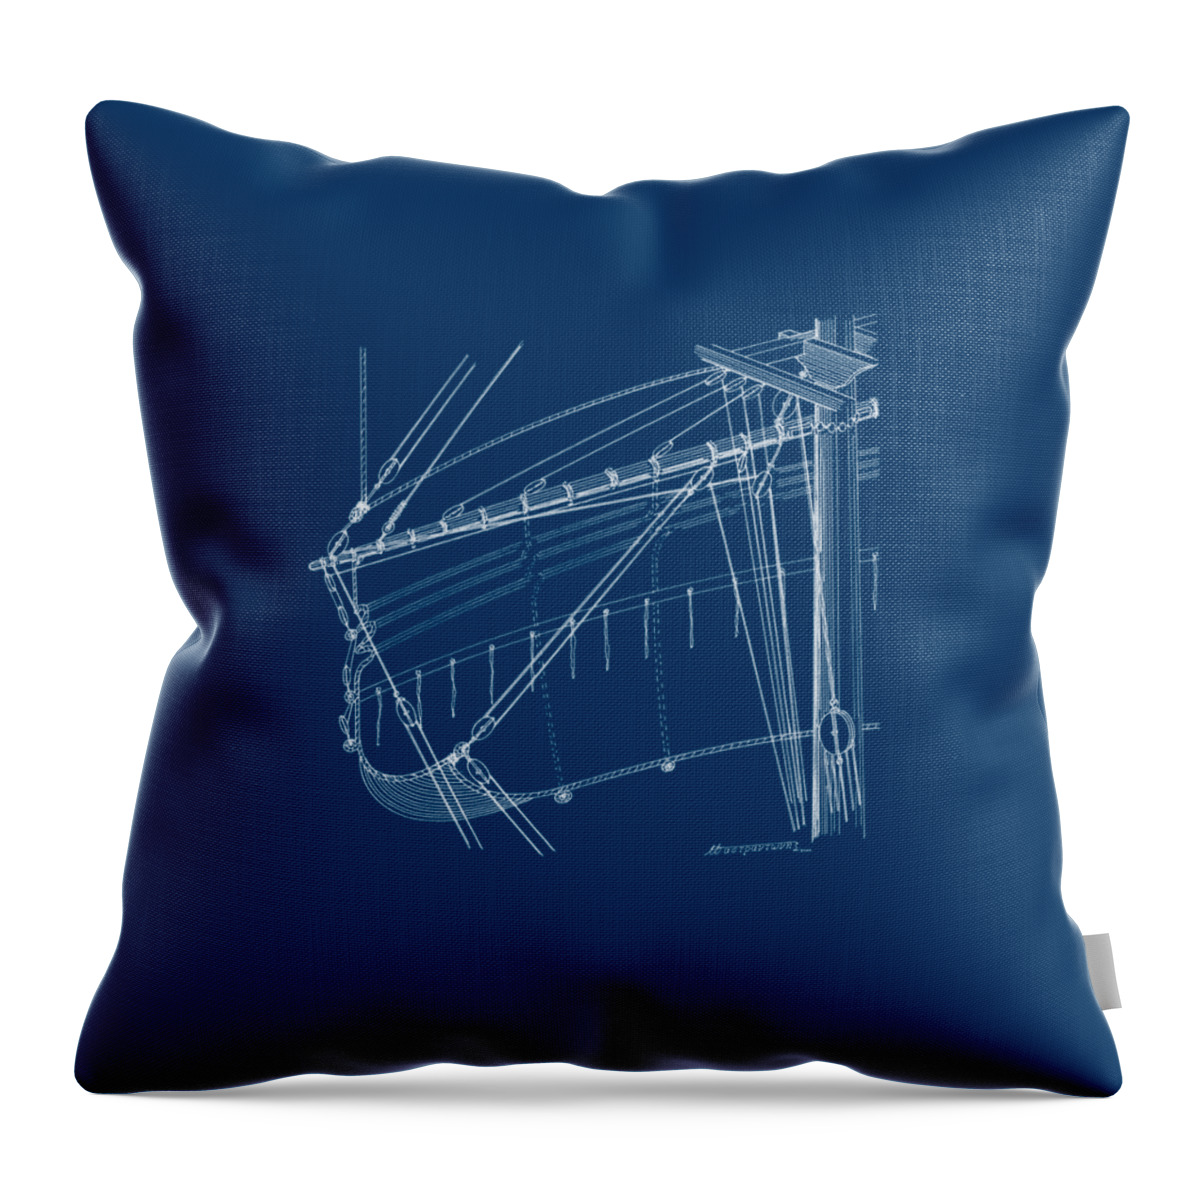 Sailing Vessels Throw Pillow featuring the drawing Top-mast yard and sail - blueprint by Panagiotis Mastrantonis